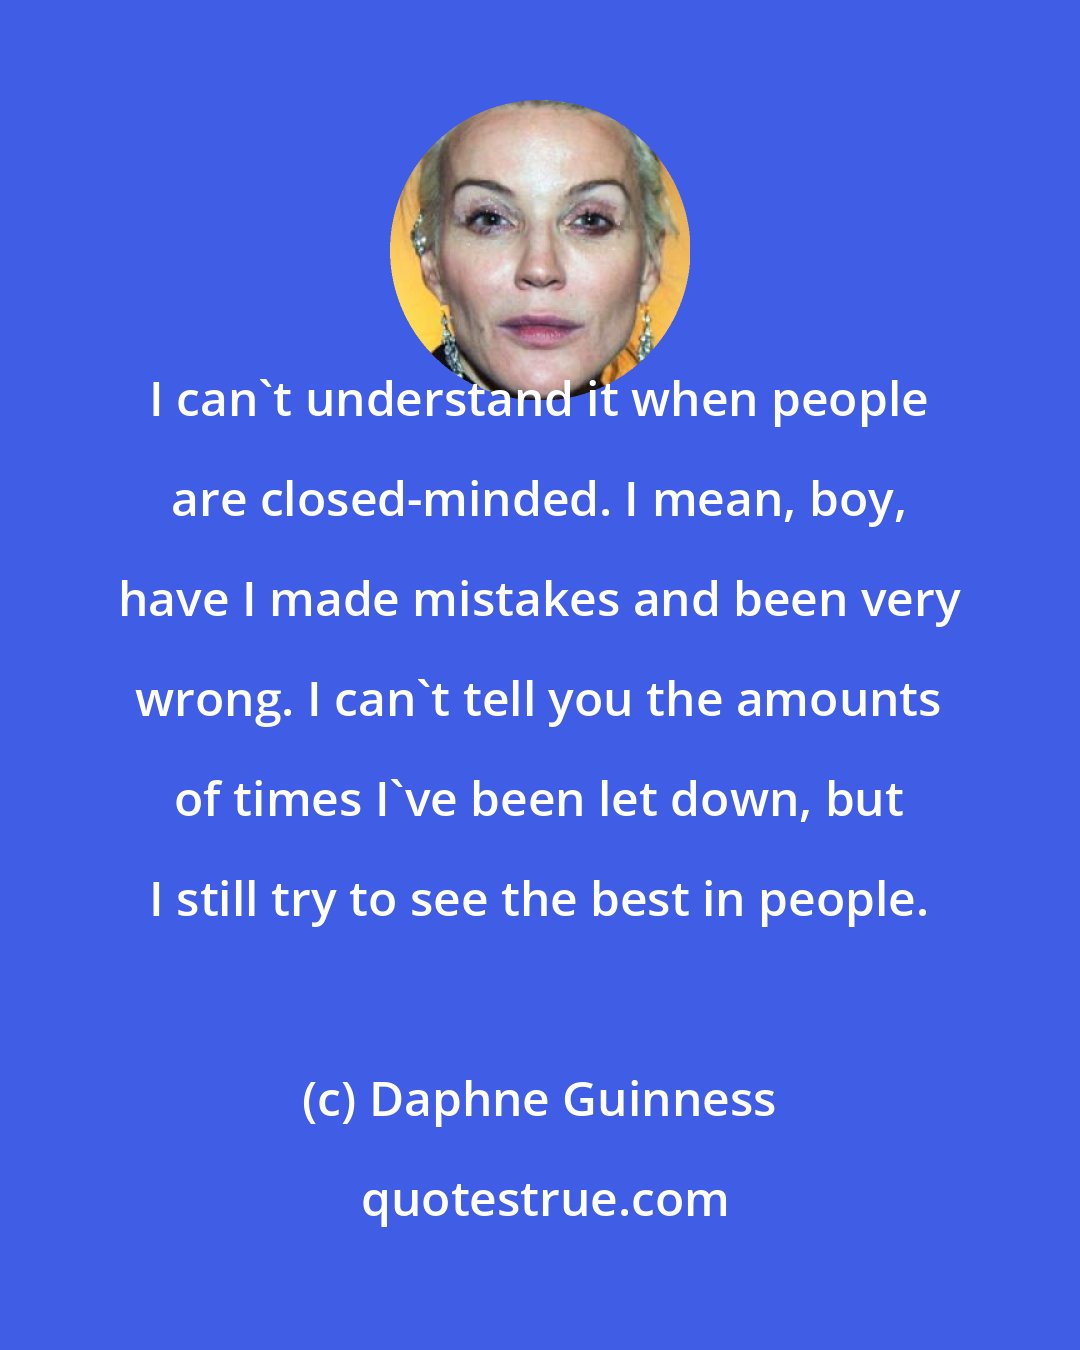 Daphne Guinness: I can't understand it when people are closed-minded. I mean, boy, have I made mistakes and been very wrong. I can't tell you the amounts of times I've been let down, but I still try to see the best in people.